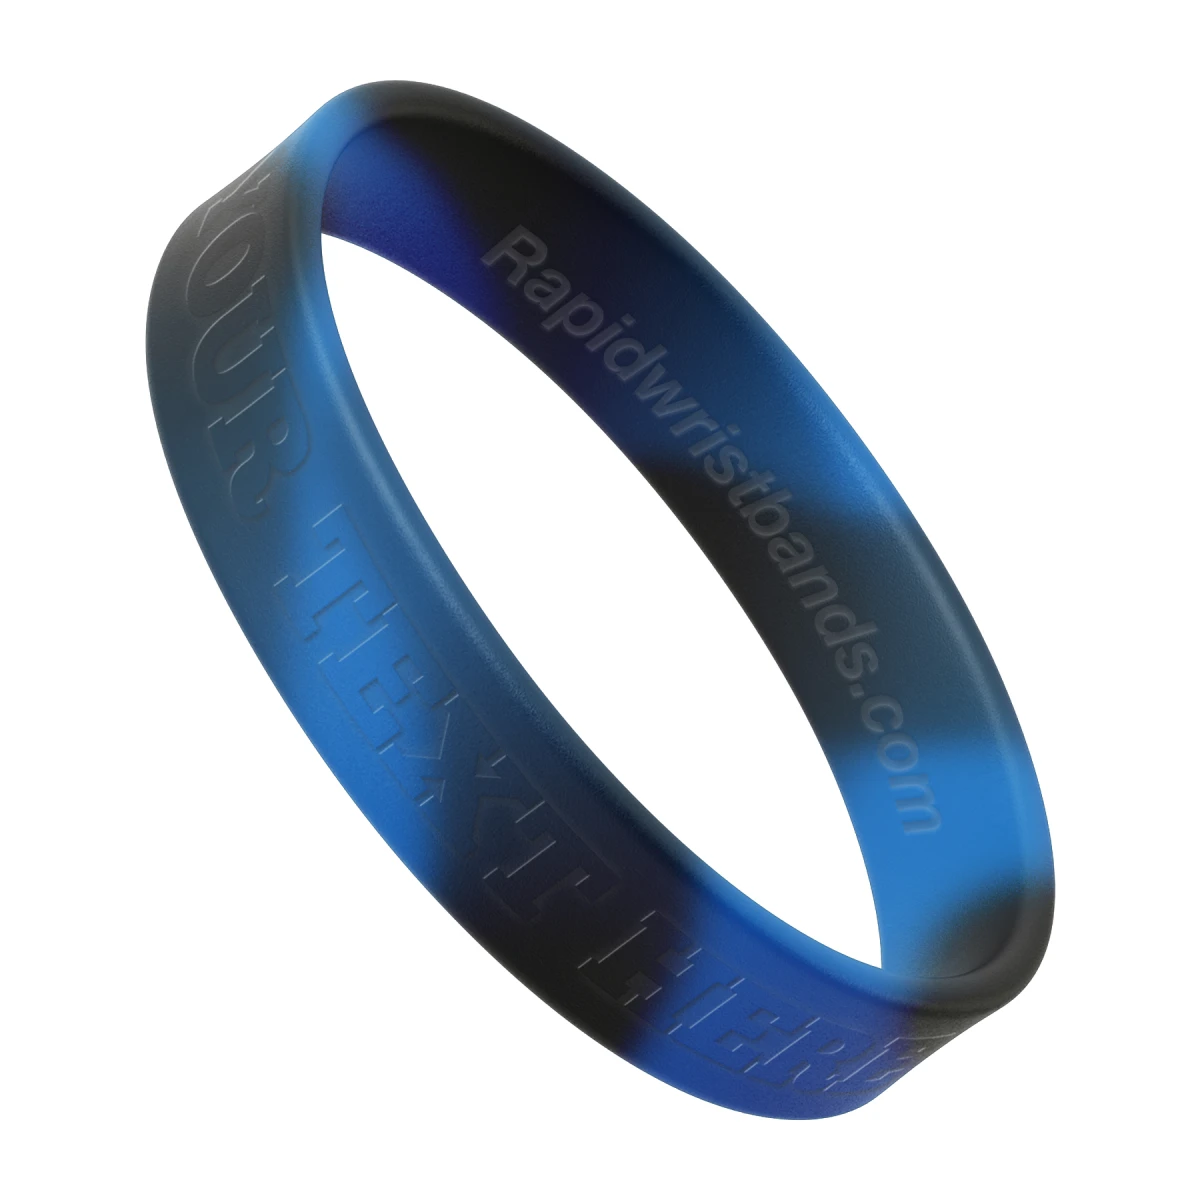 Swirl Black/Blue Wristband With Your Text Here Embossed